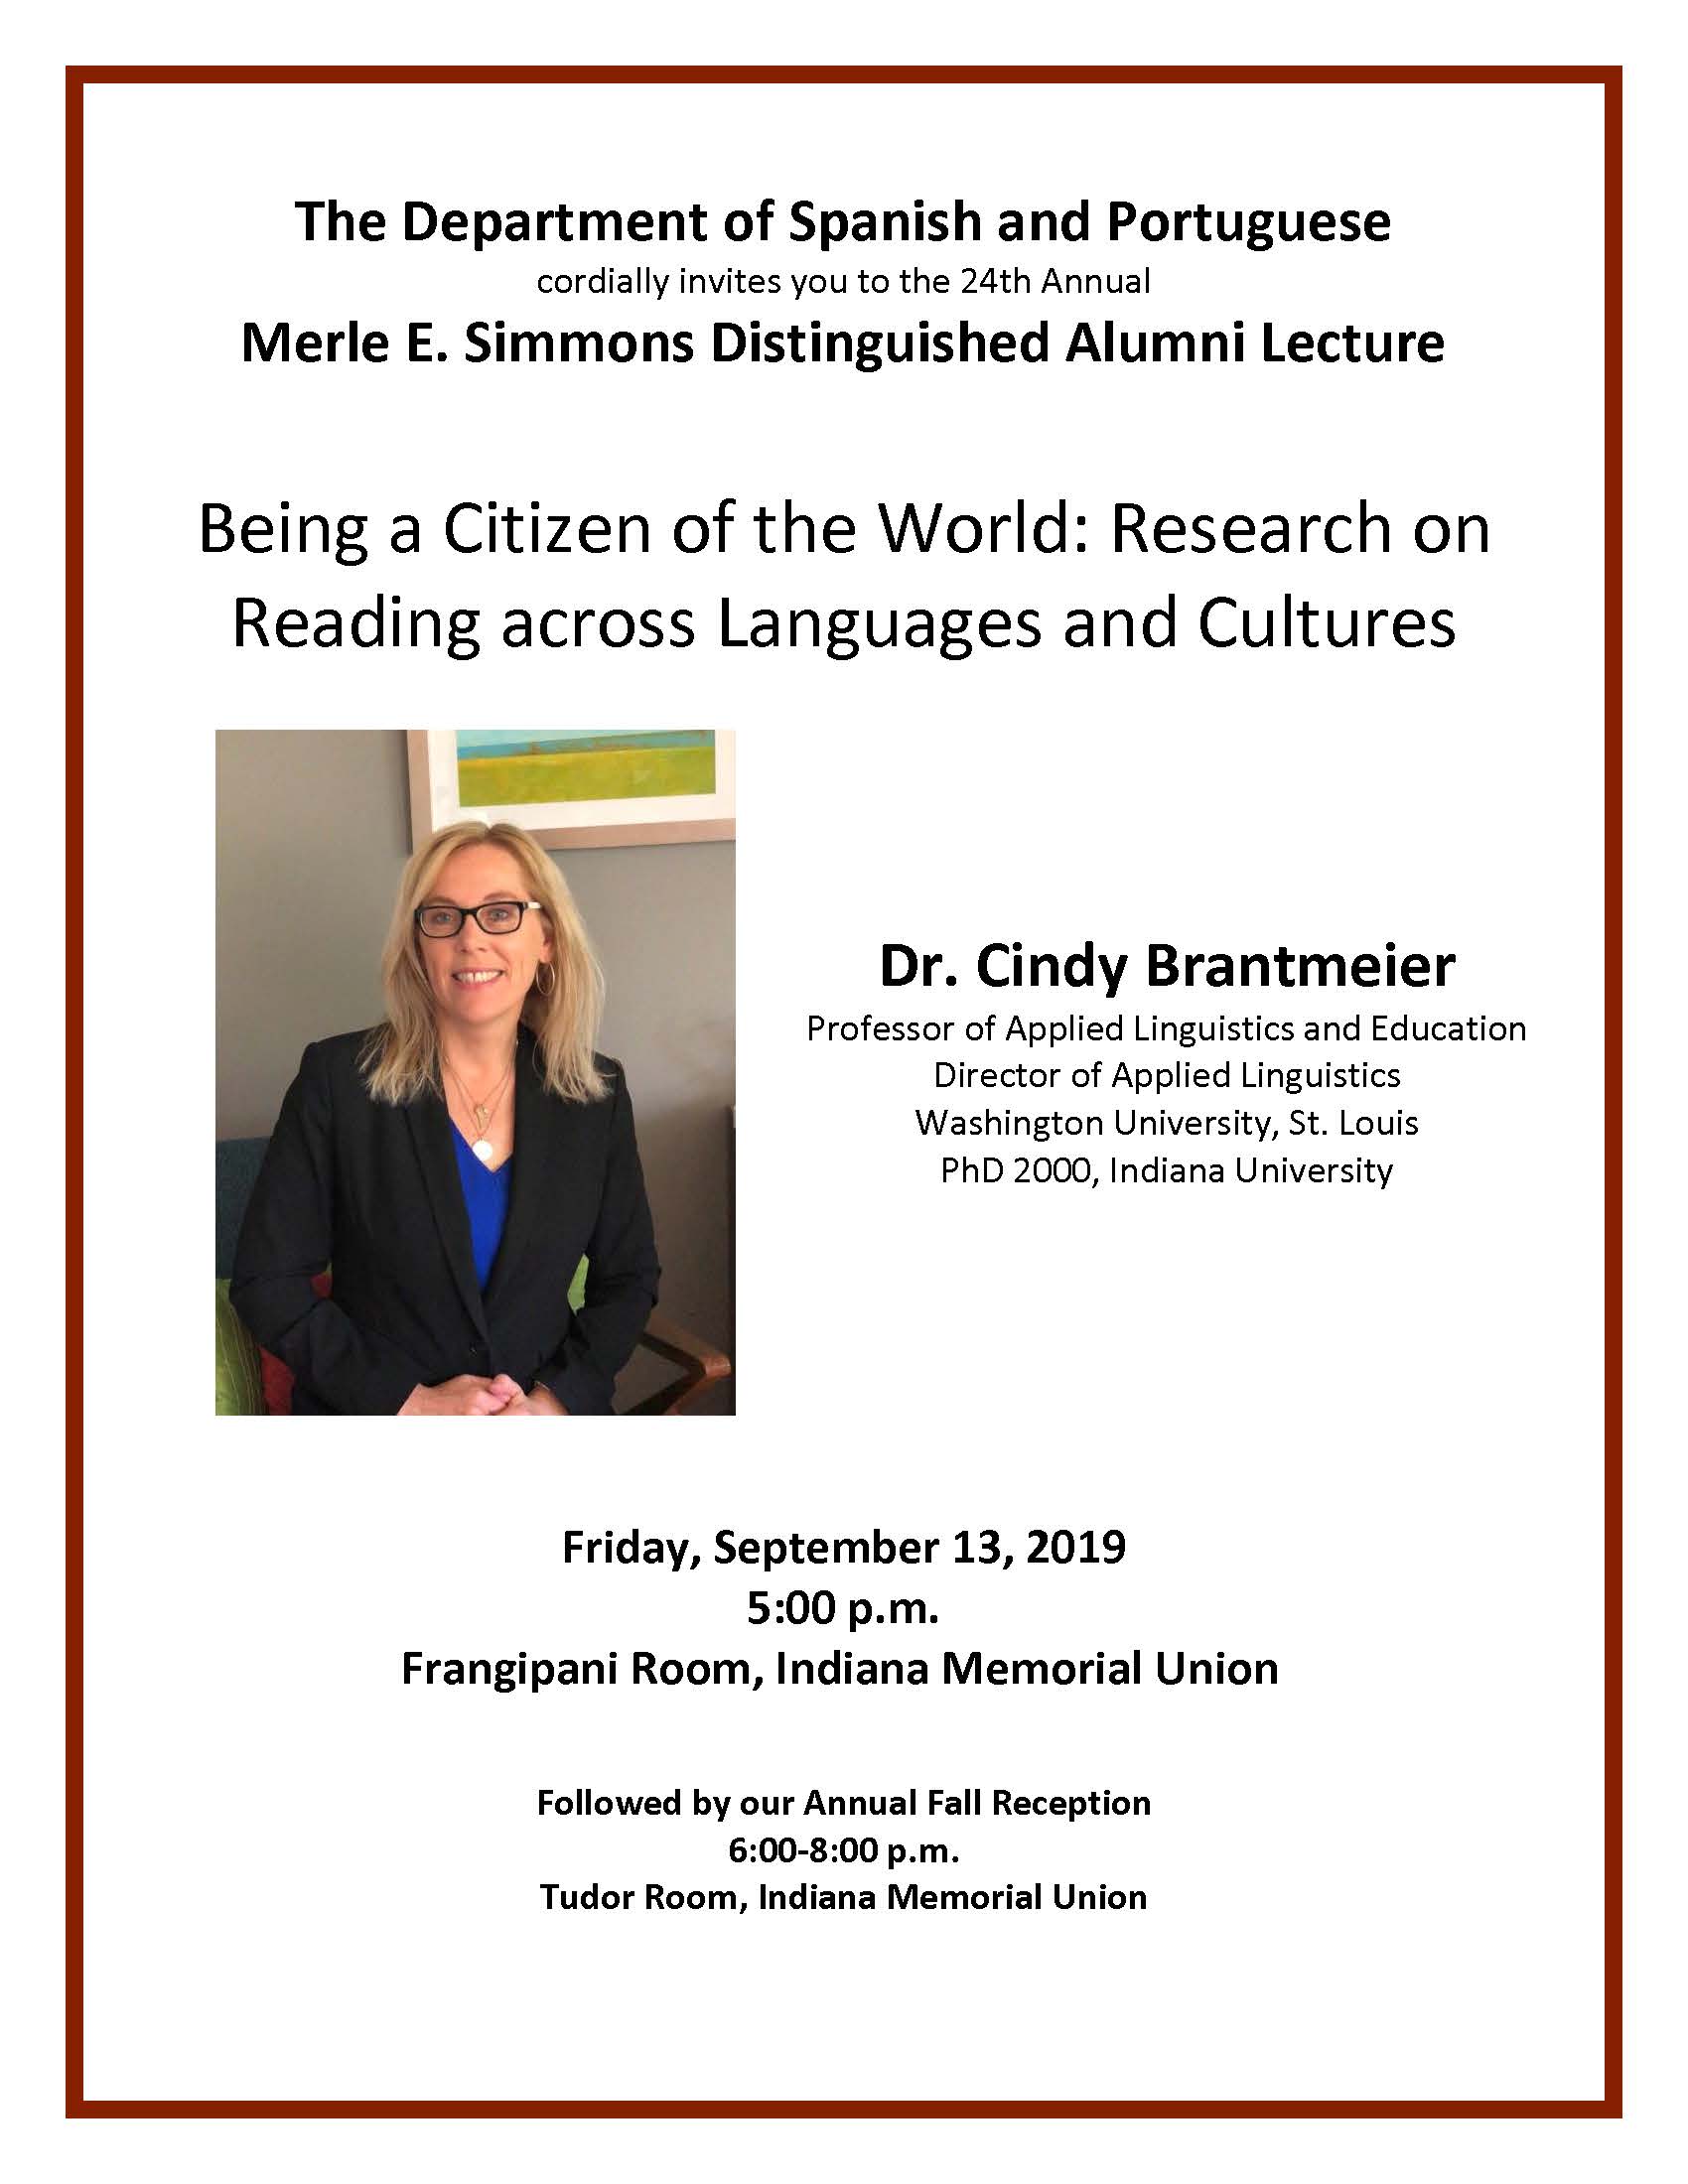 Dr. Cindy Brantmeier is presenting a Lecture, "Being a Citizen of the World: Research on Reading across Languages and Cultures